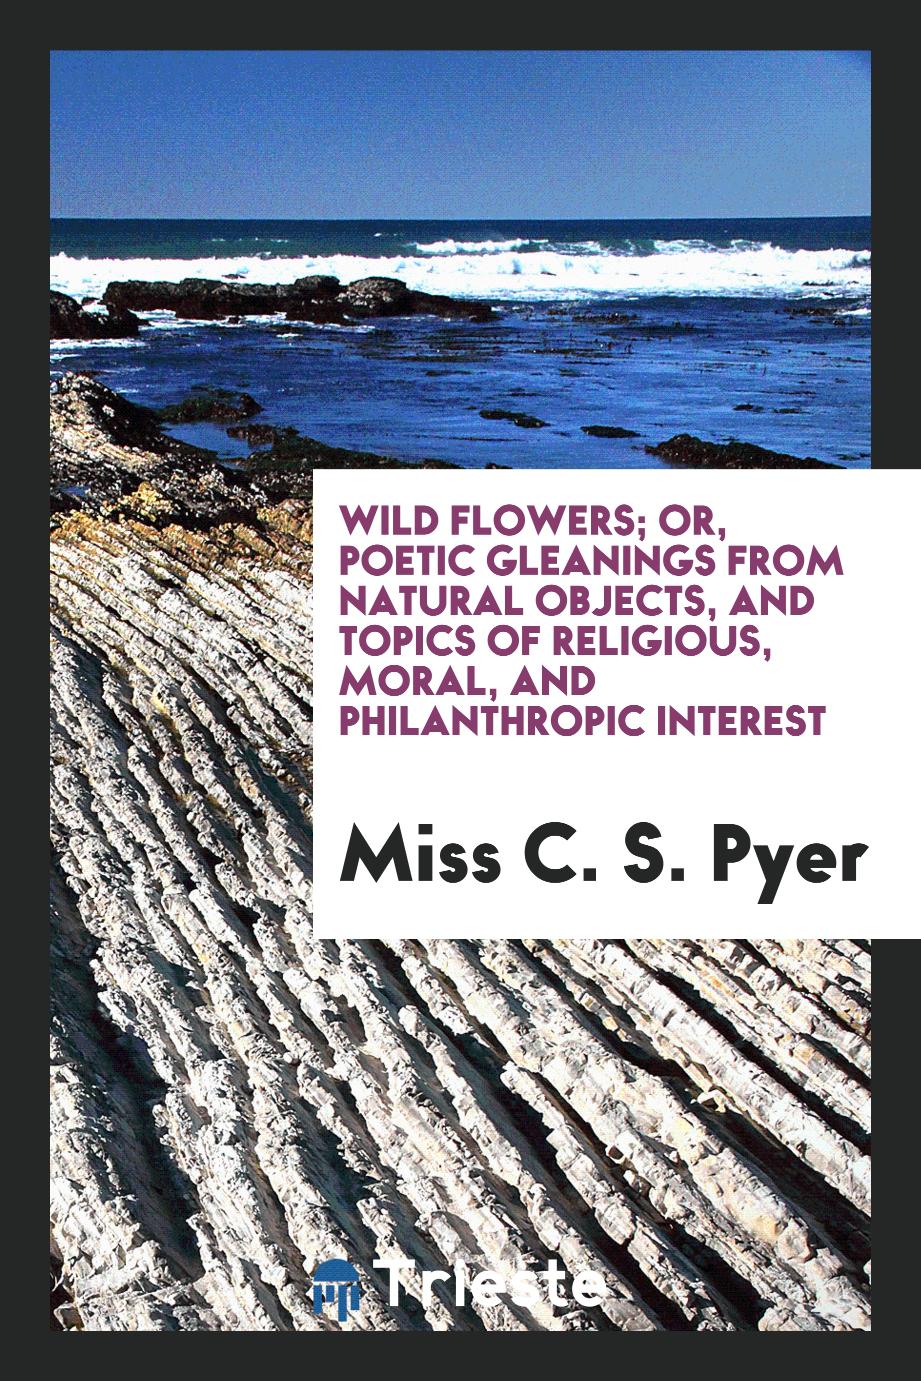 Wild Flowers; Or, Poetic Gleanings from Natural Objects, and Topics of Religious, Moral, and Philanthropic Interest